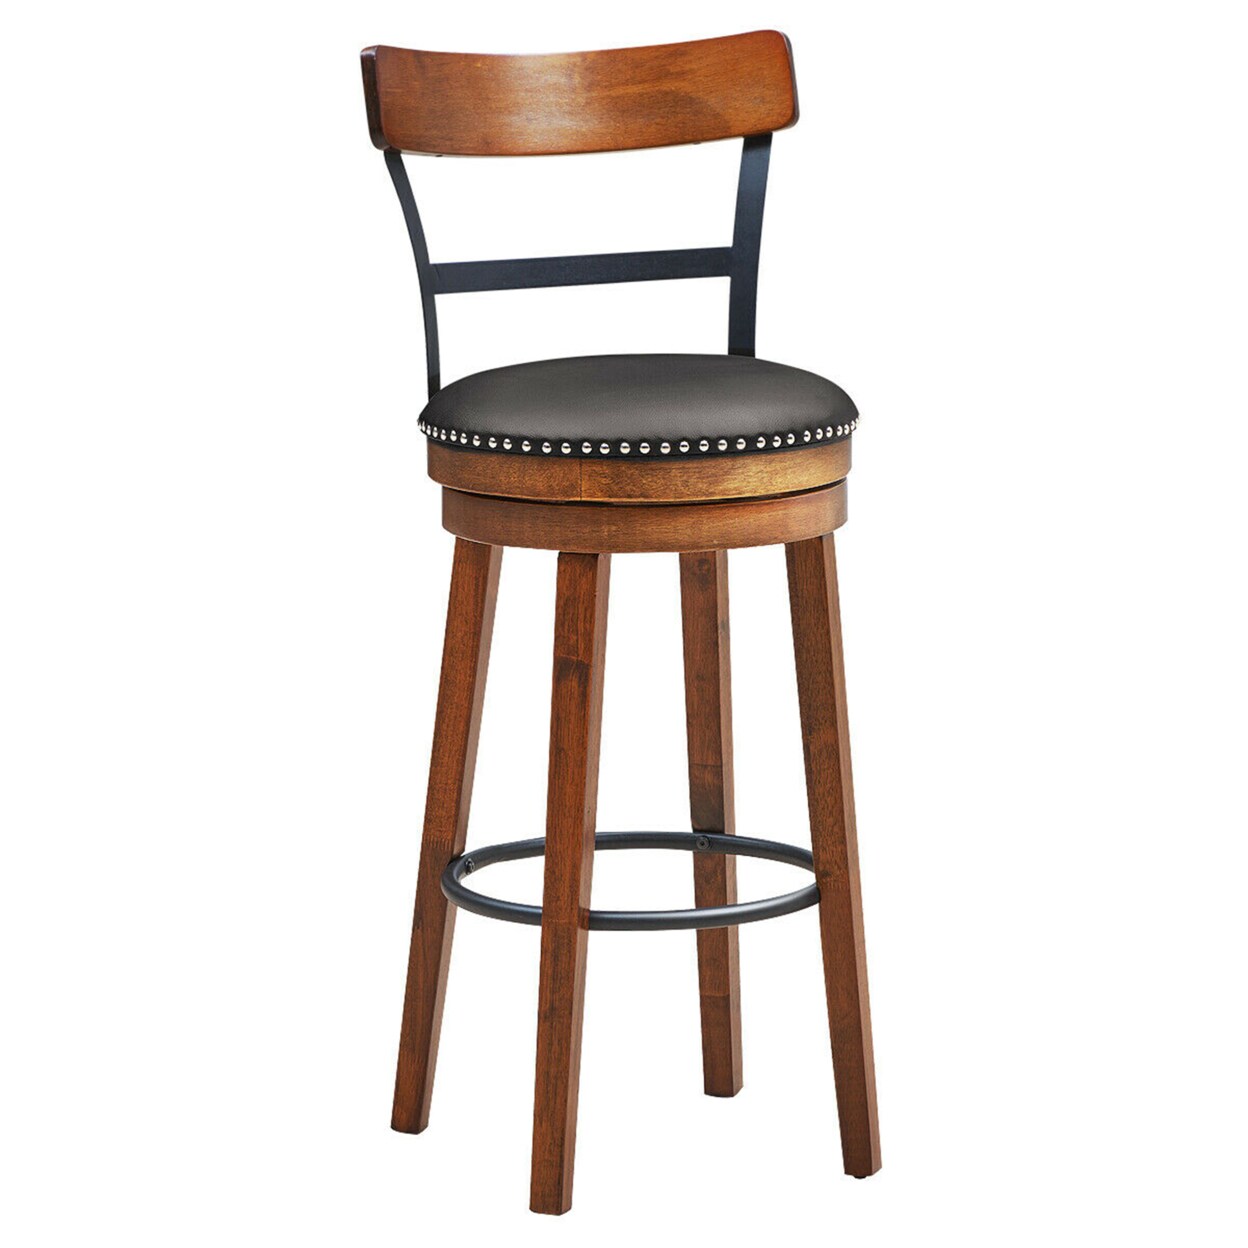 Gymax 30.5 BarStool Swivel Pub Height kitchen Dining Bar Chair with Rubber Wood Legs